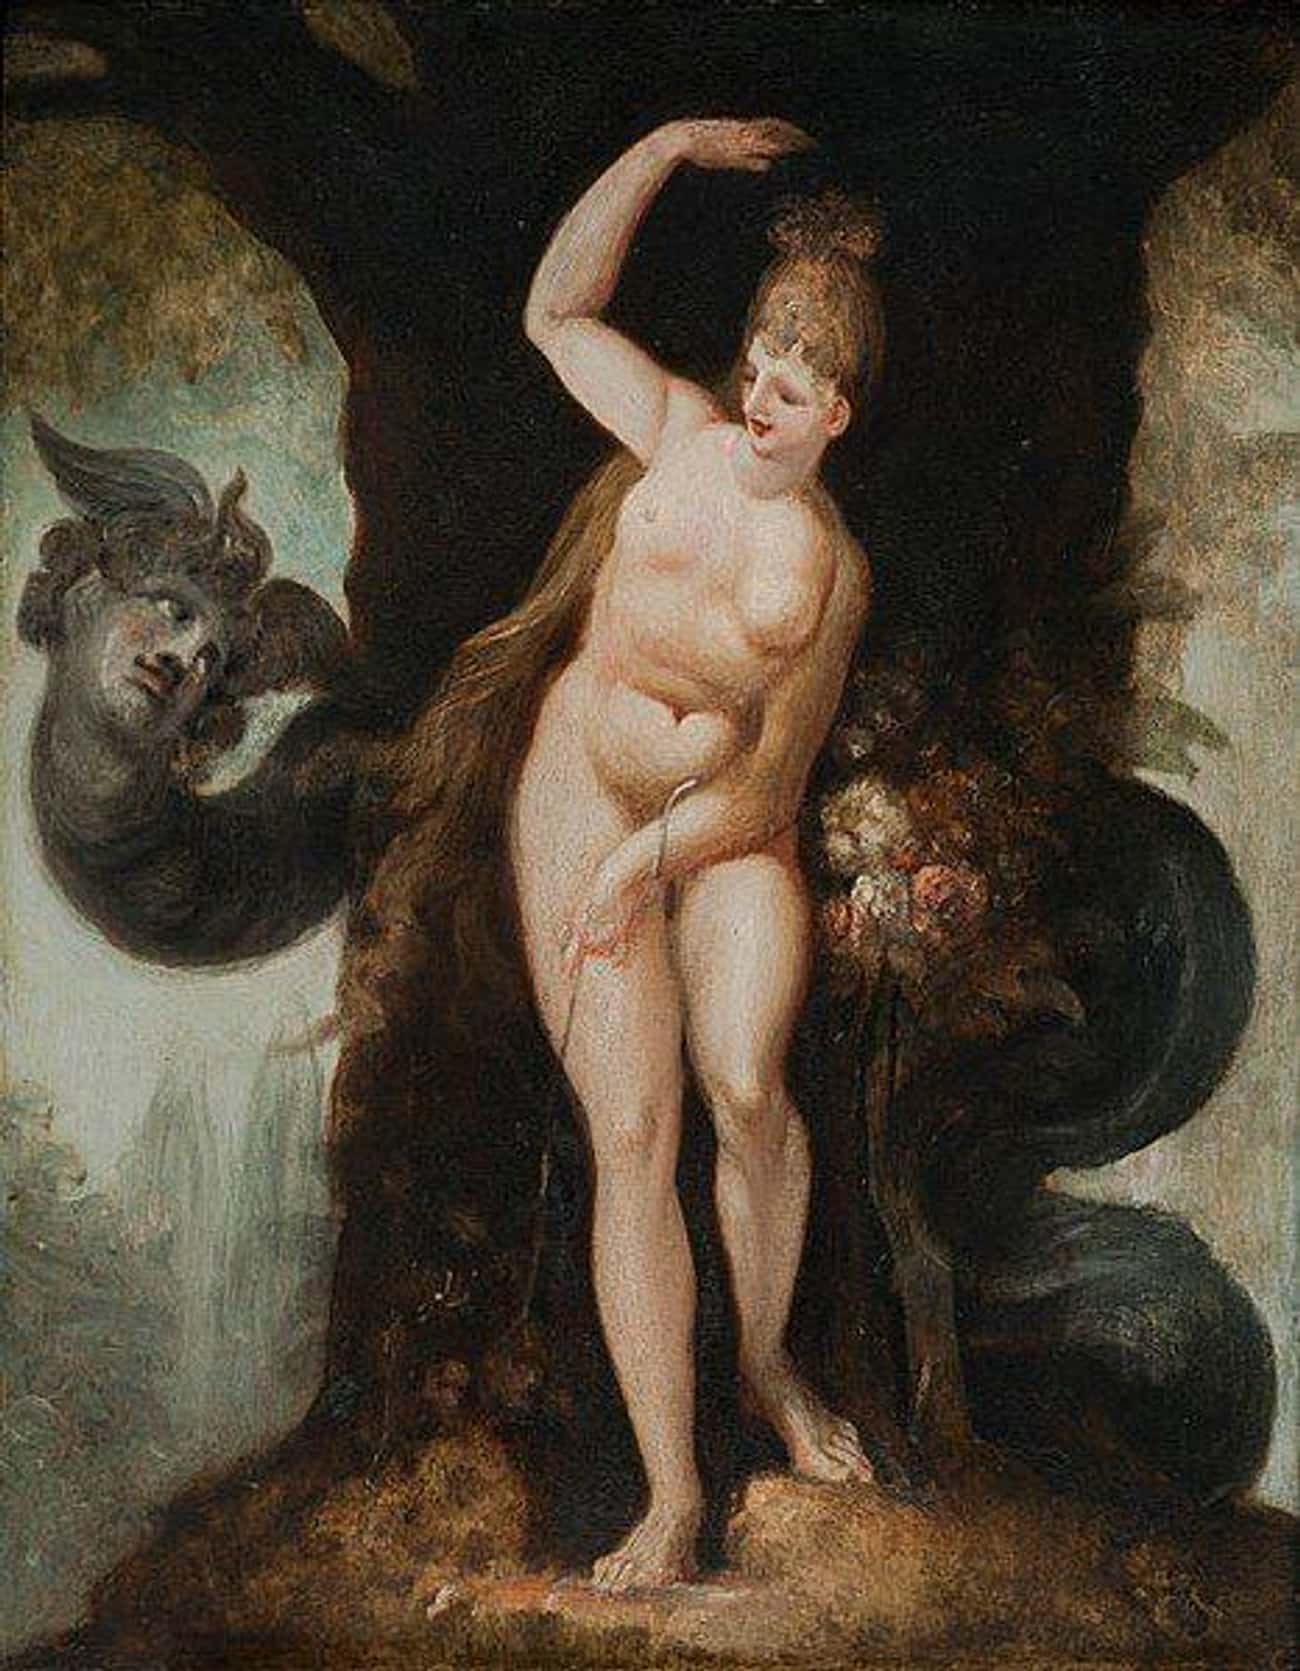 In The Book Of Genesis, The Devil Appears As The Serpent In The Garden Of Eden